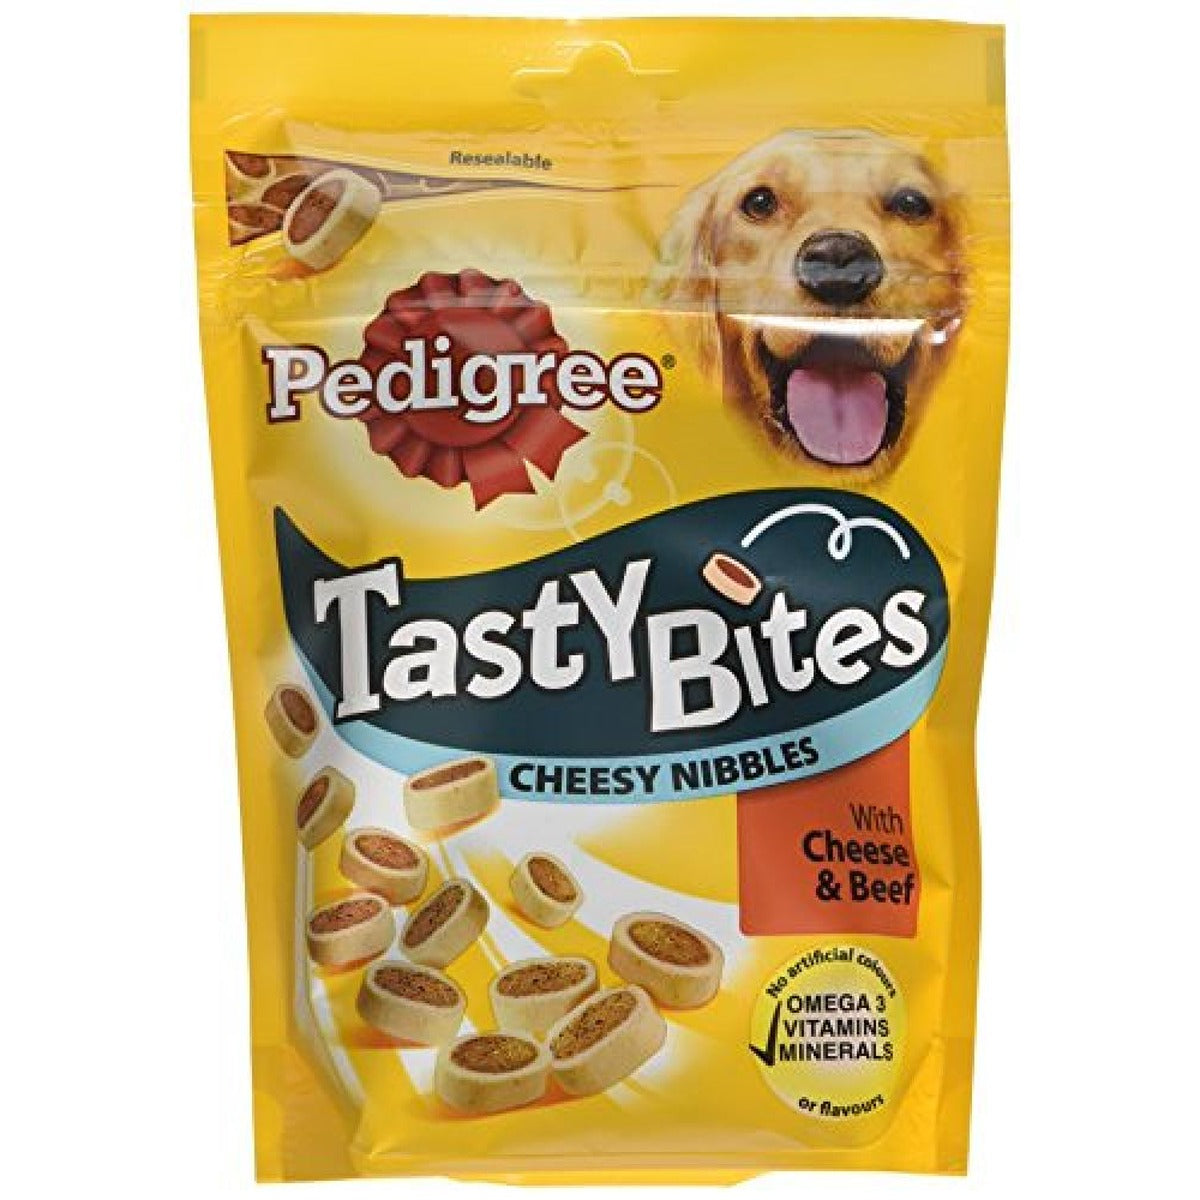 Pedigree Tasty Minis Cheese & Beef Nibbles.